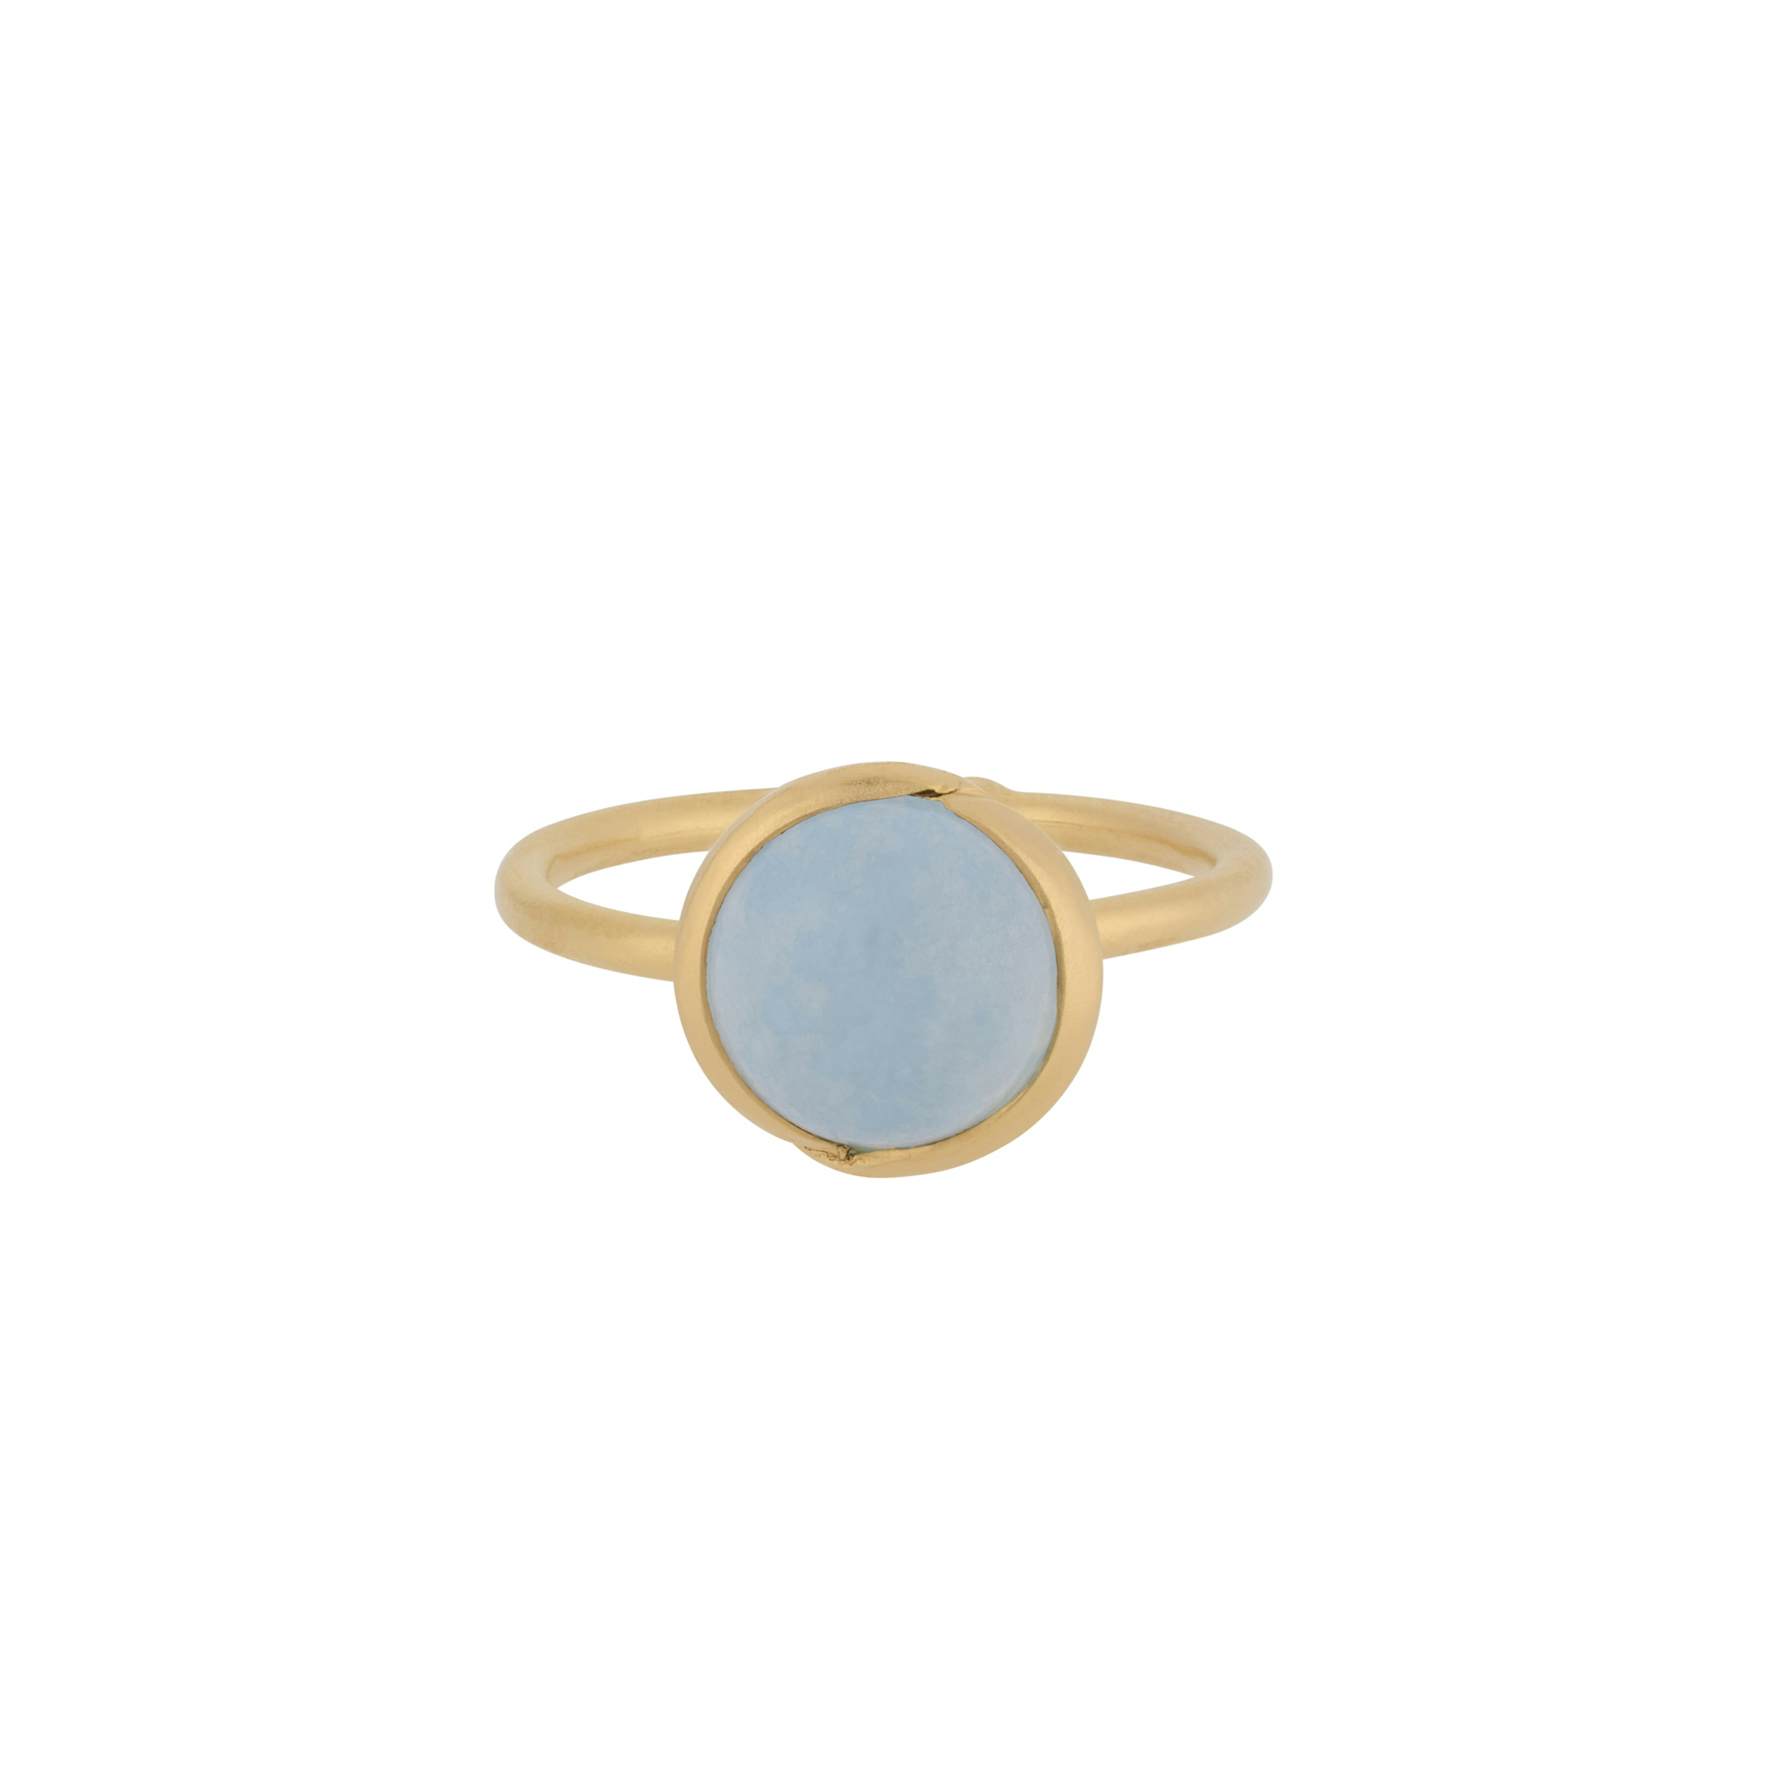 Aura Blue Ring from Pernille Corydon in Goldplated-Silver Sterling 925